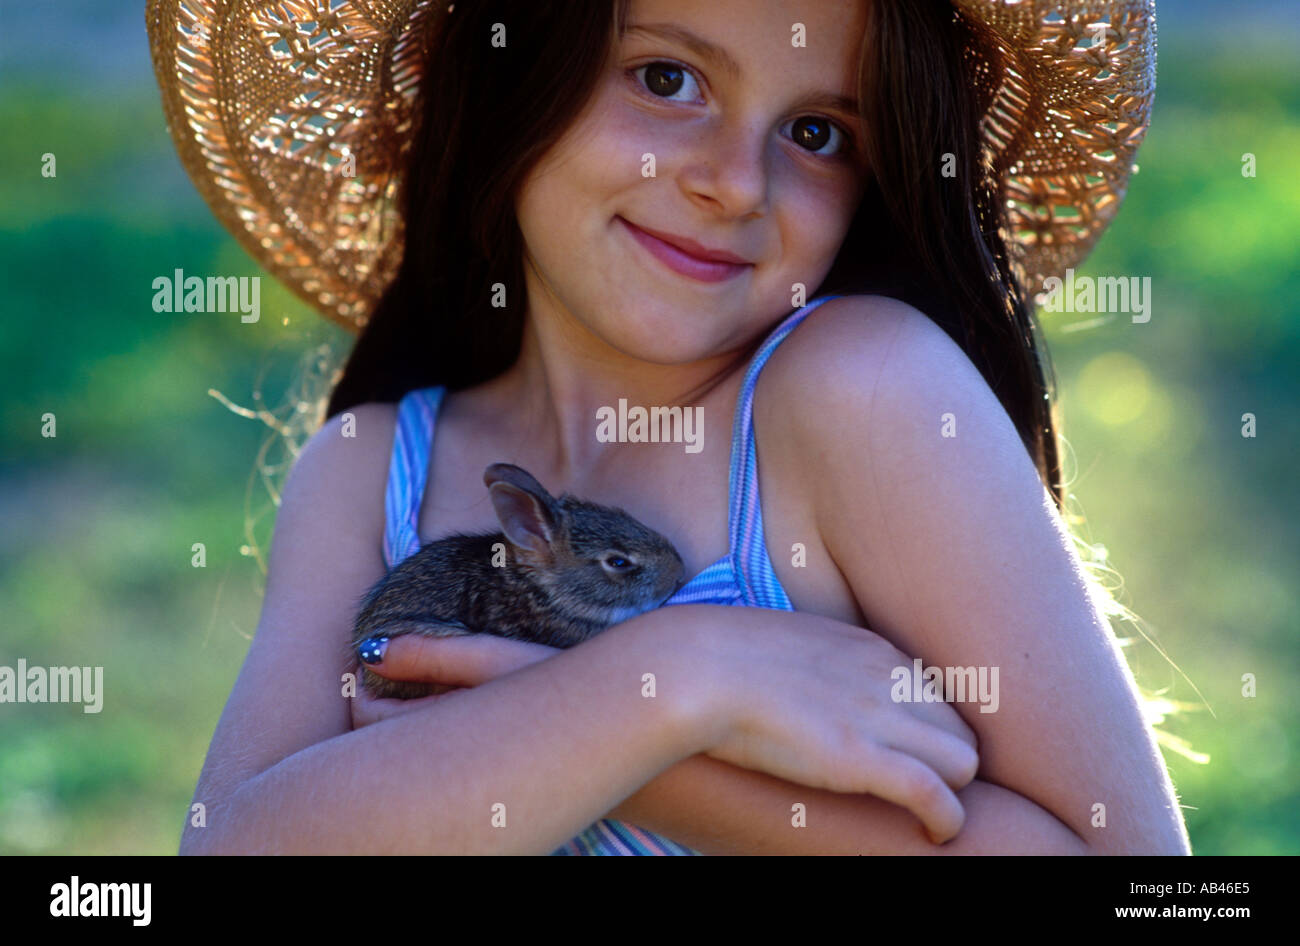 Girl holding young hare Banque D'Images